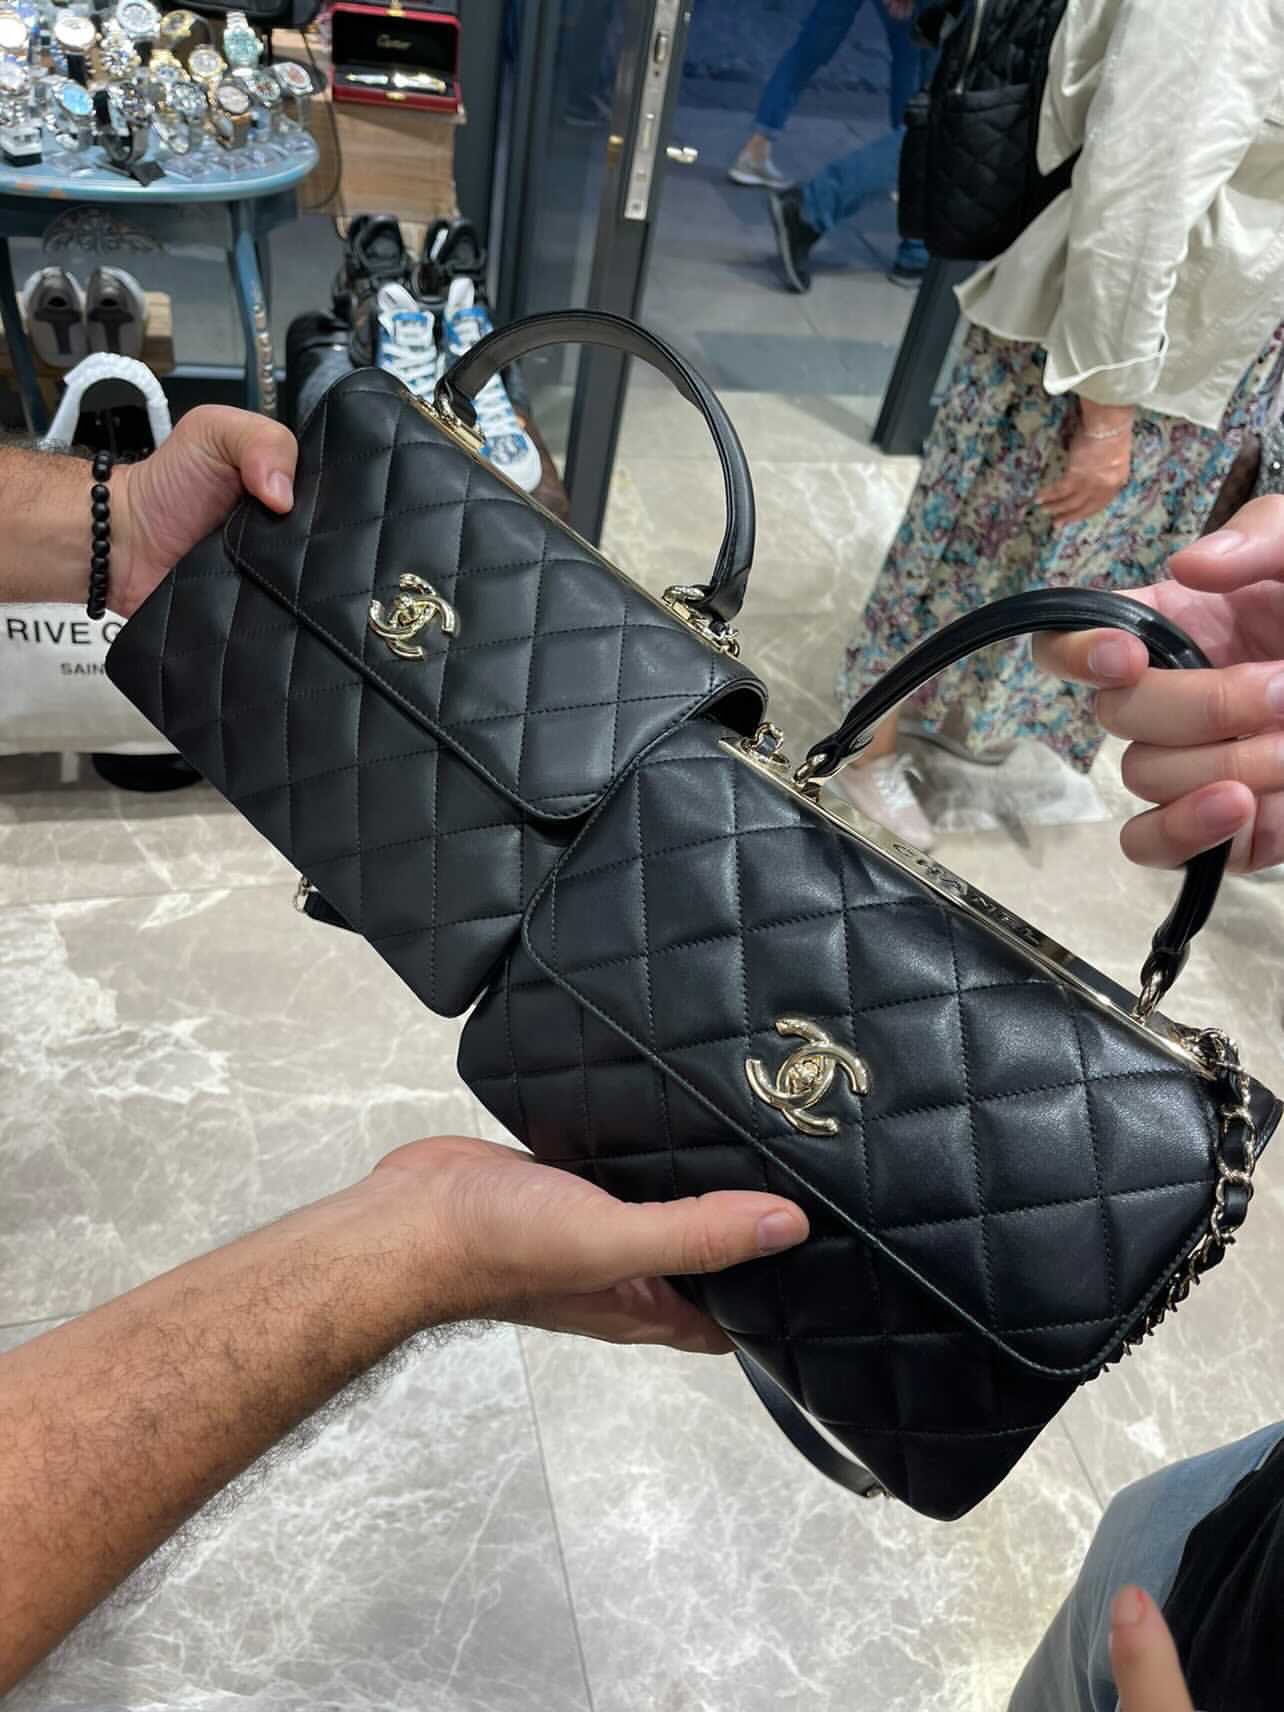 Turkey's trade in counterfeit goods booms, fuelled by falling lira | Turkey  | The Guardian